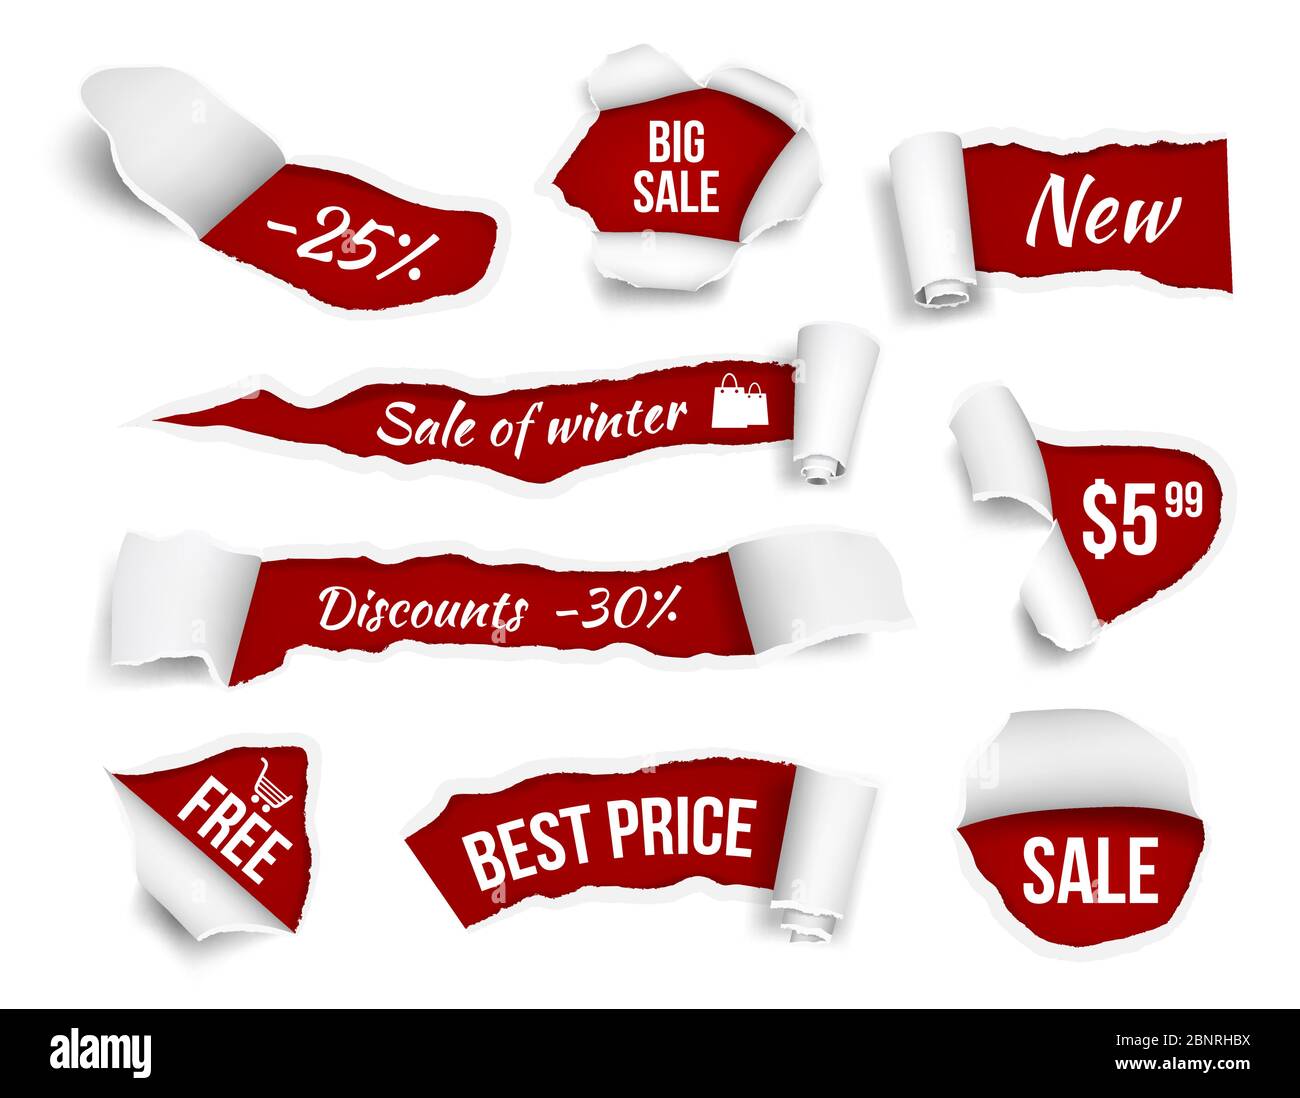 Promo banners ripped paper. Sale advertizing tags promotion cut edges pages vector realistic pictures Stock Vector